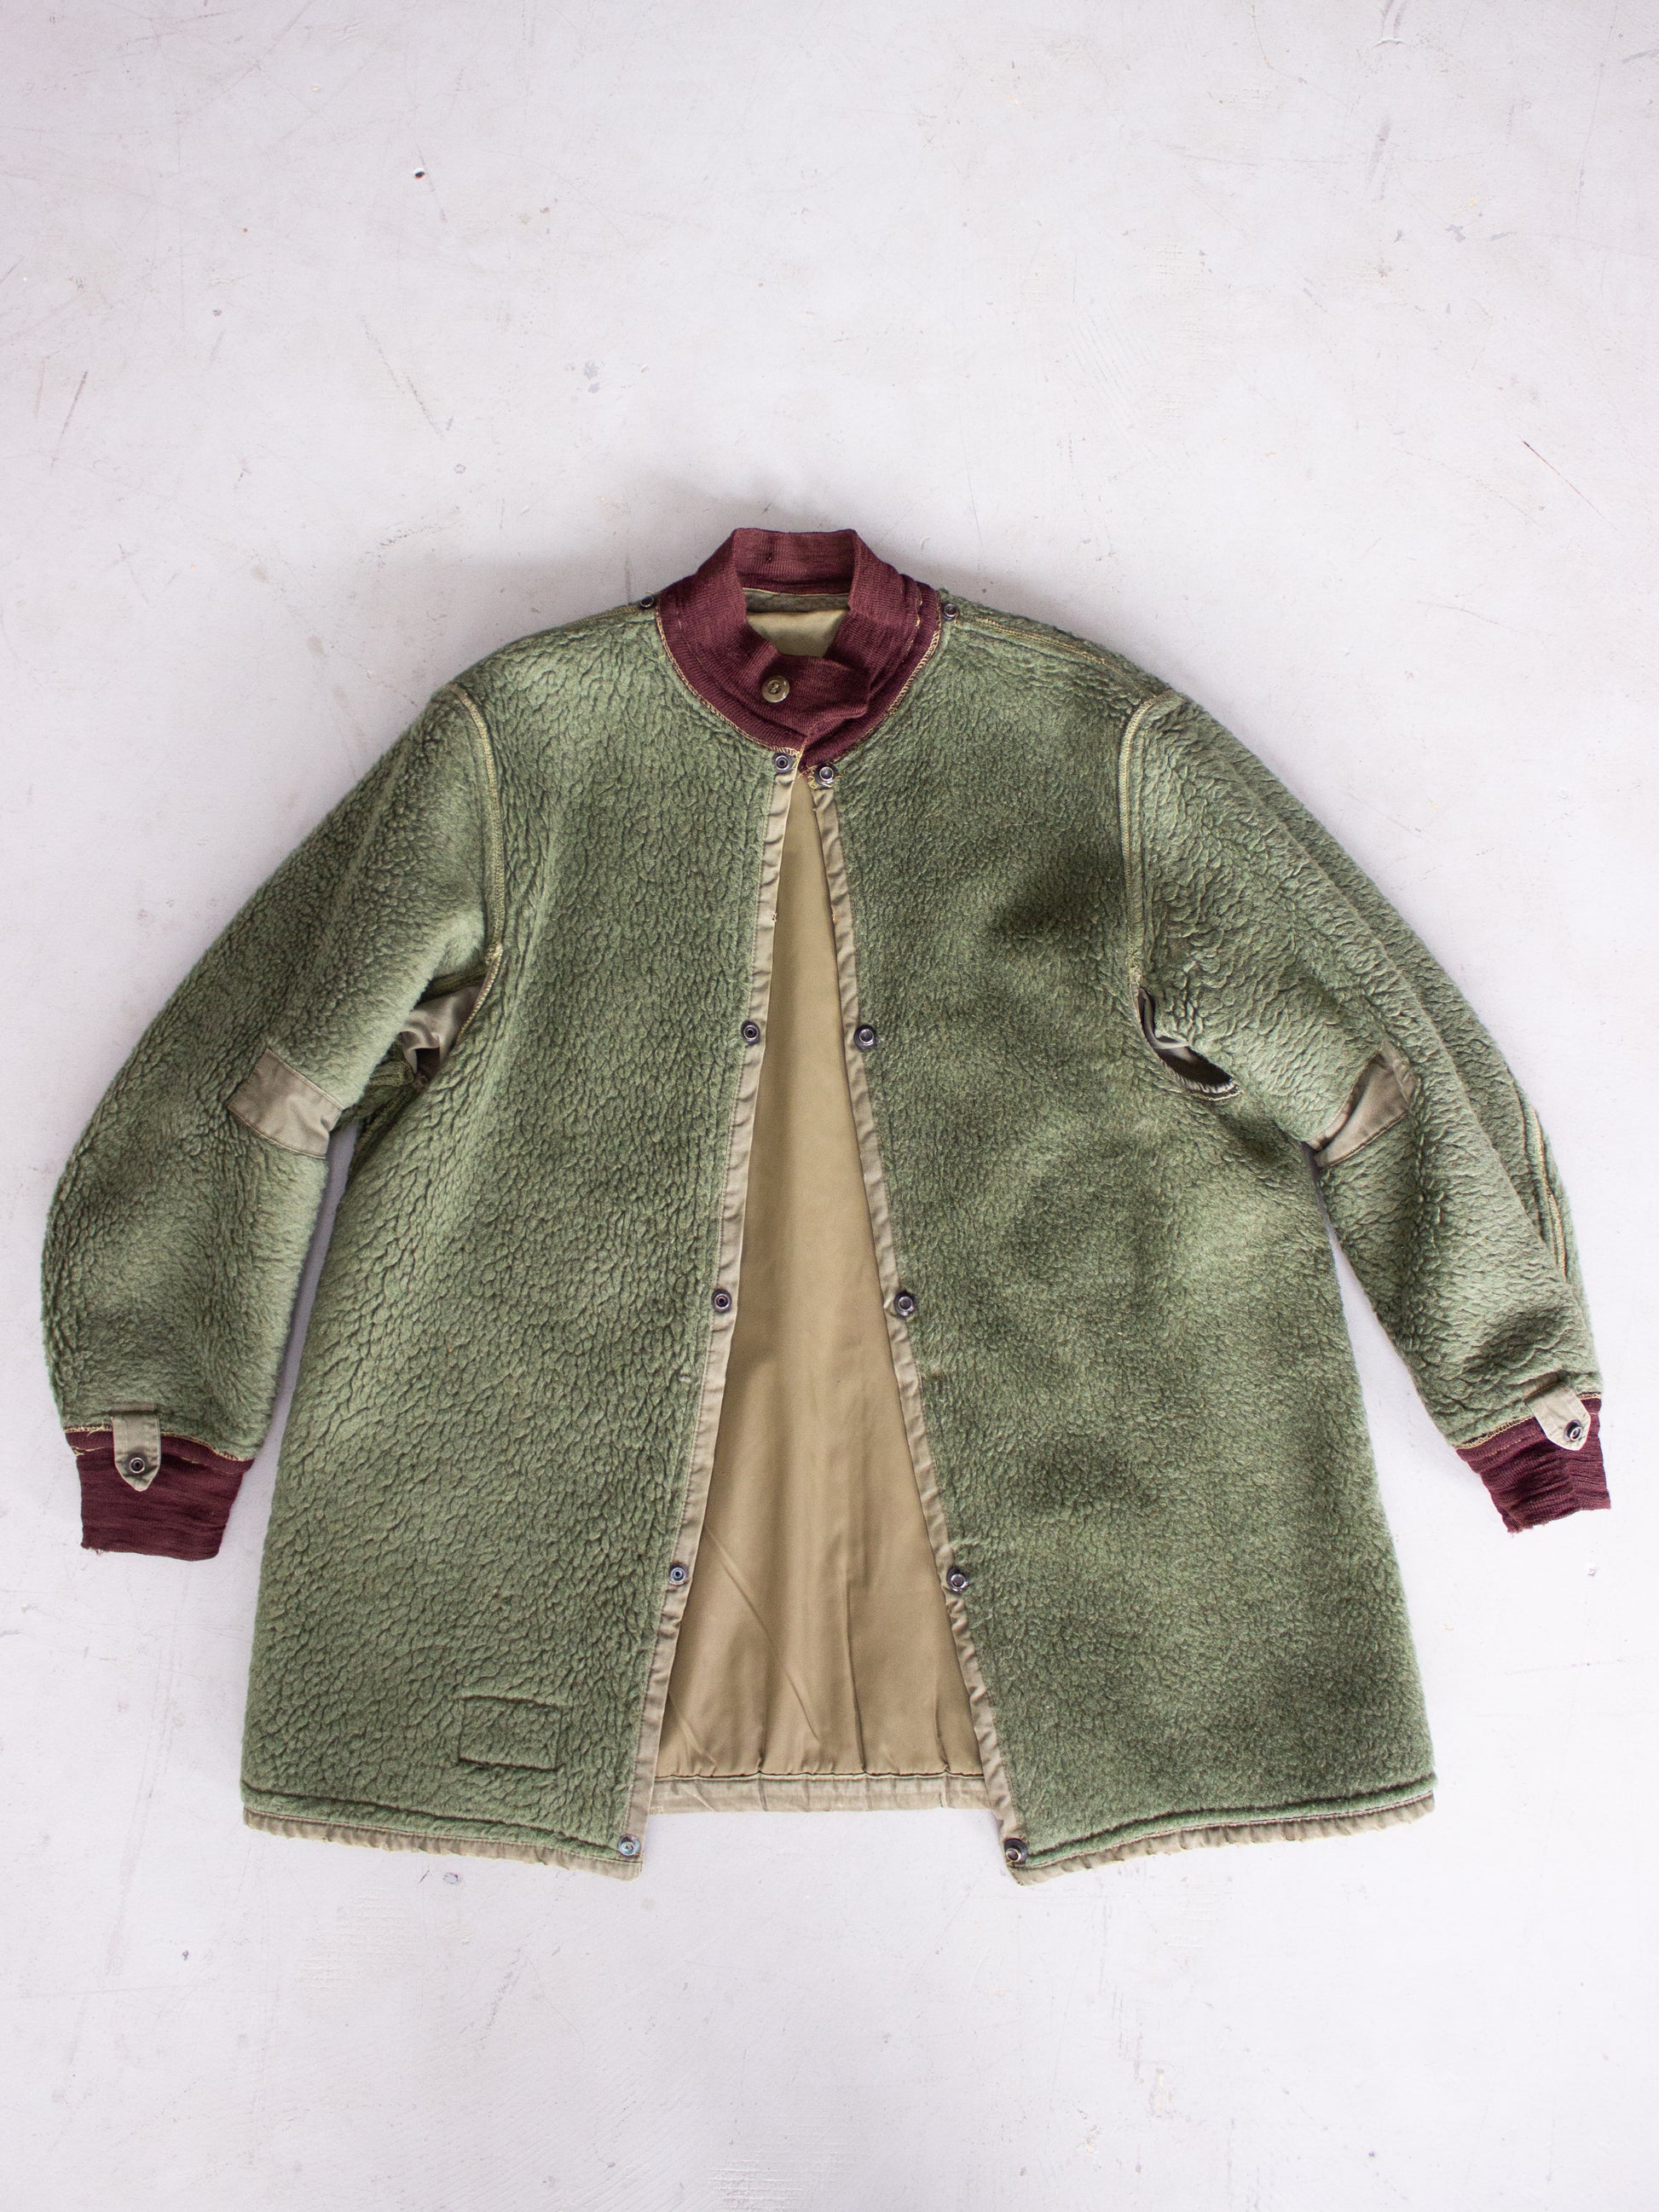 Vintage 1960's Fleece Military Liner Jacket by North West